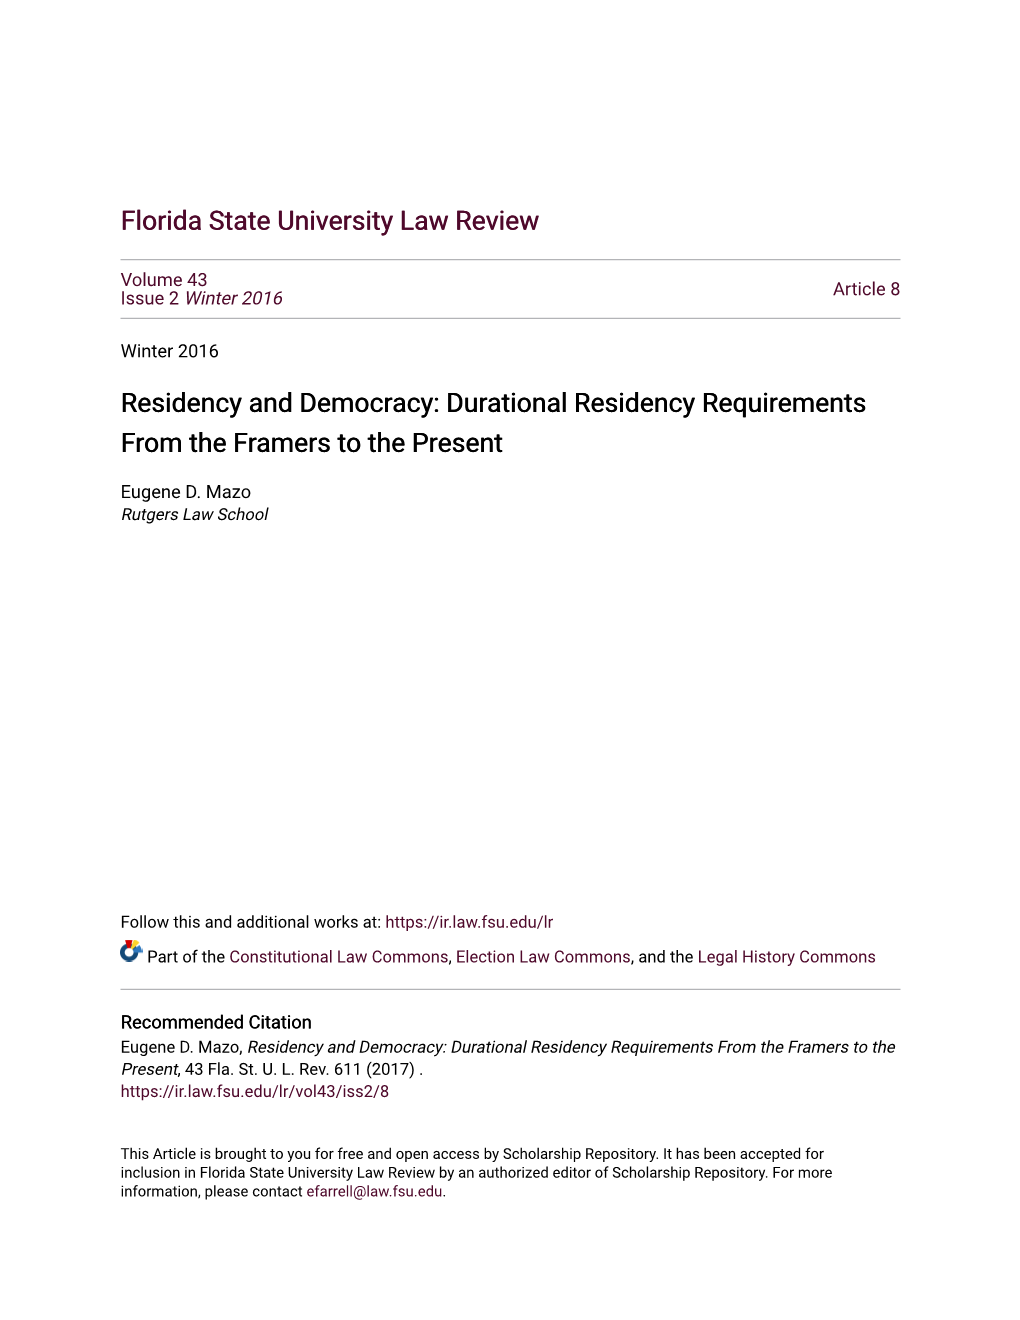 Residency and Democracy: Durational Residency Requirements from the Framers to the Present